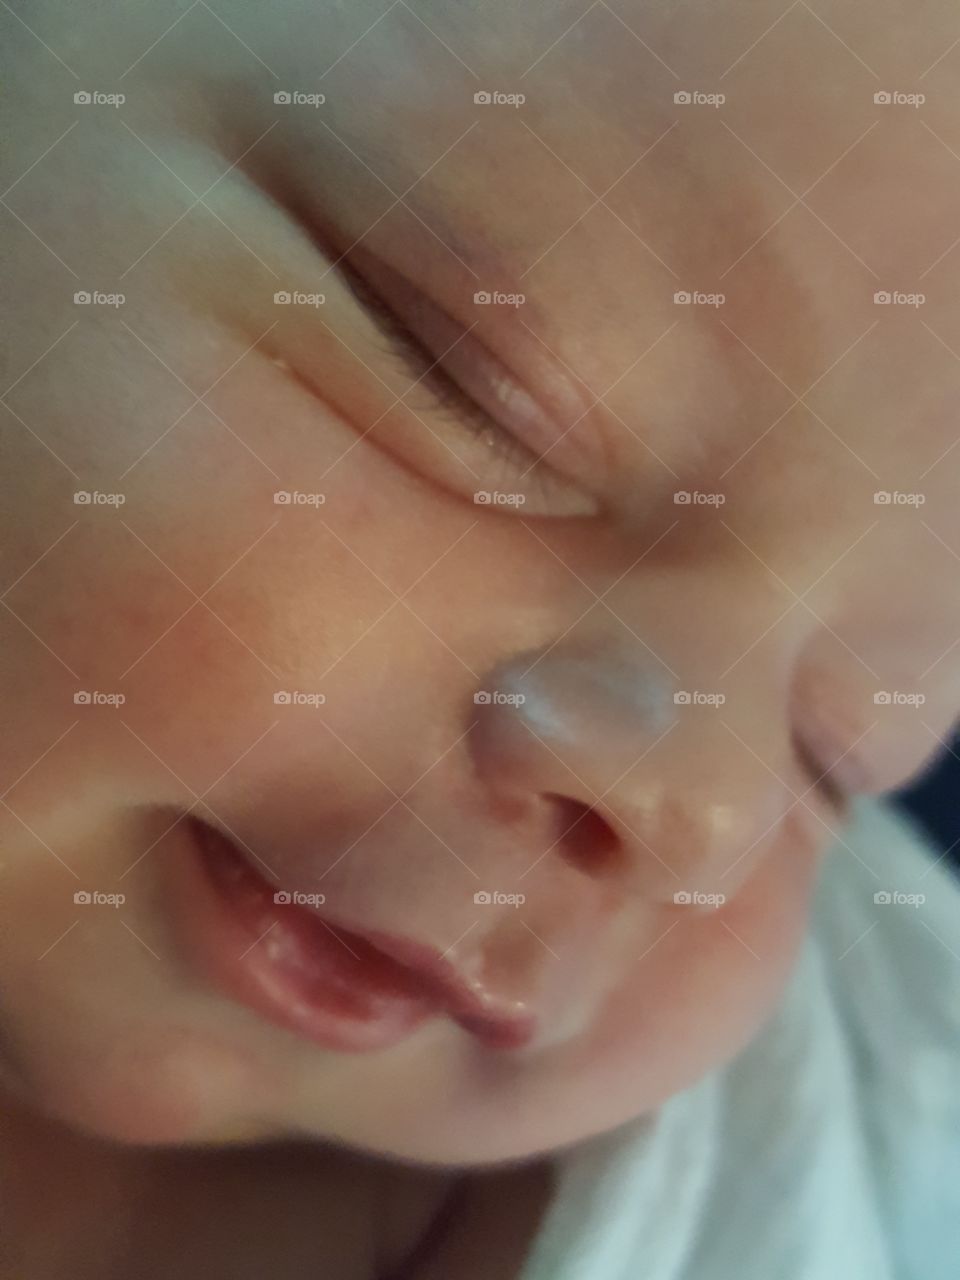 Extreme close-up of sleeping baby's face